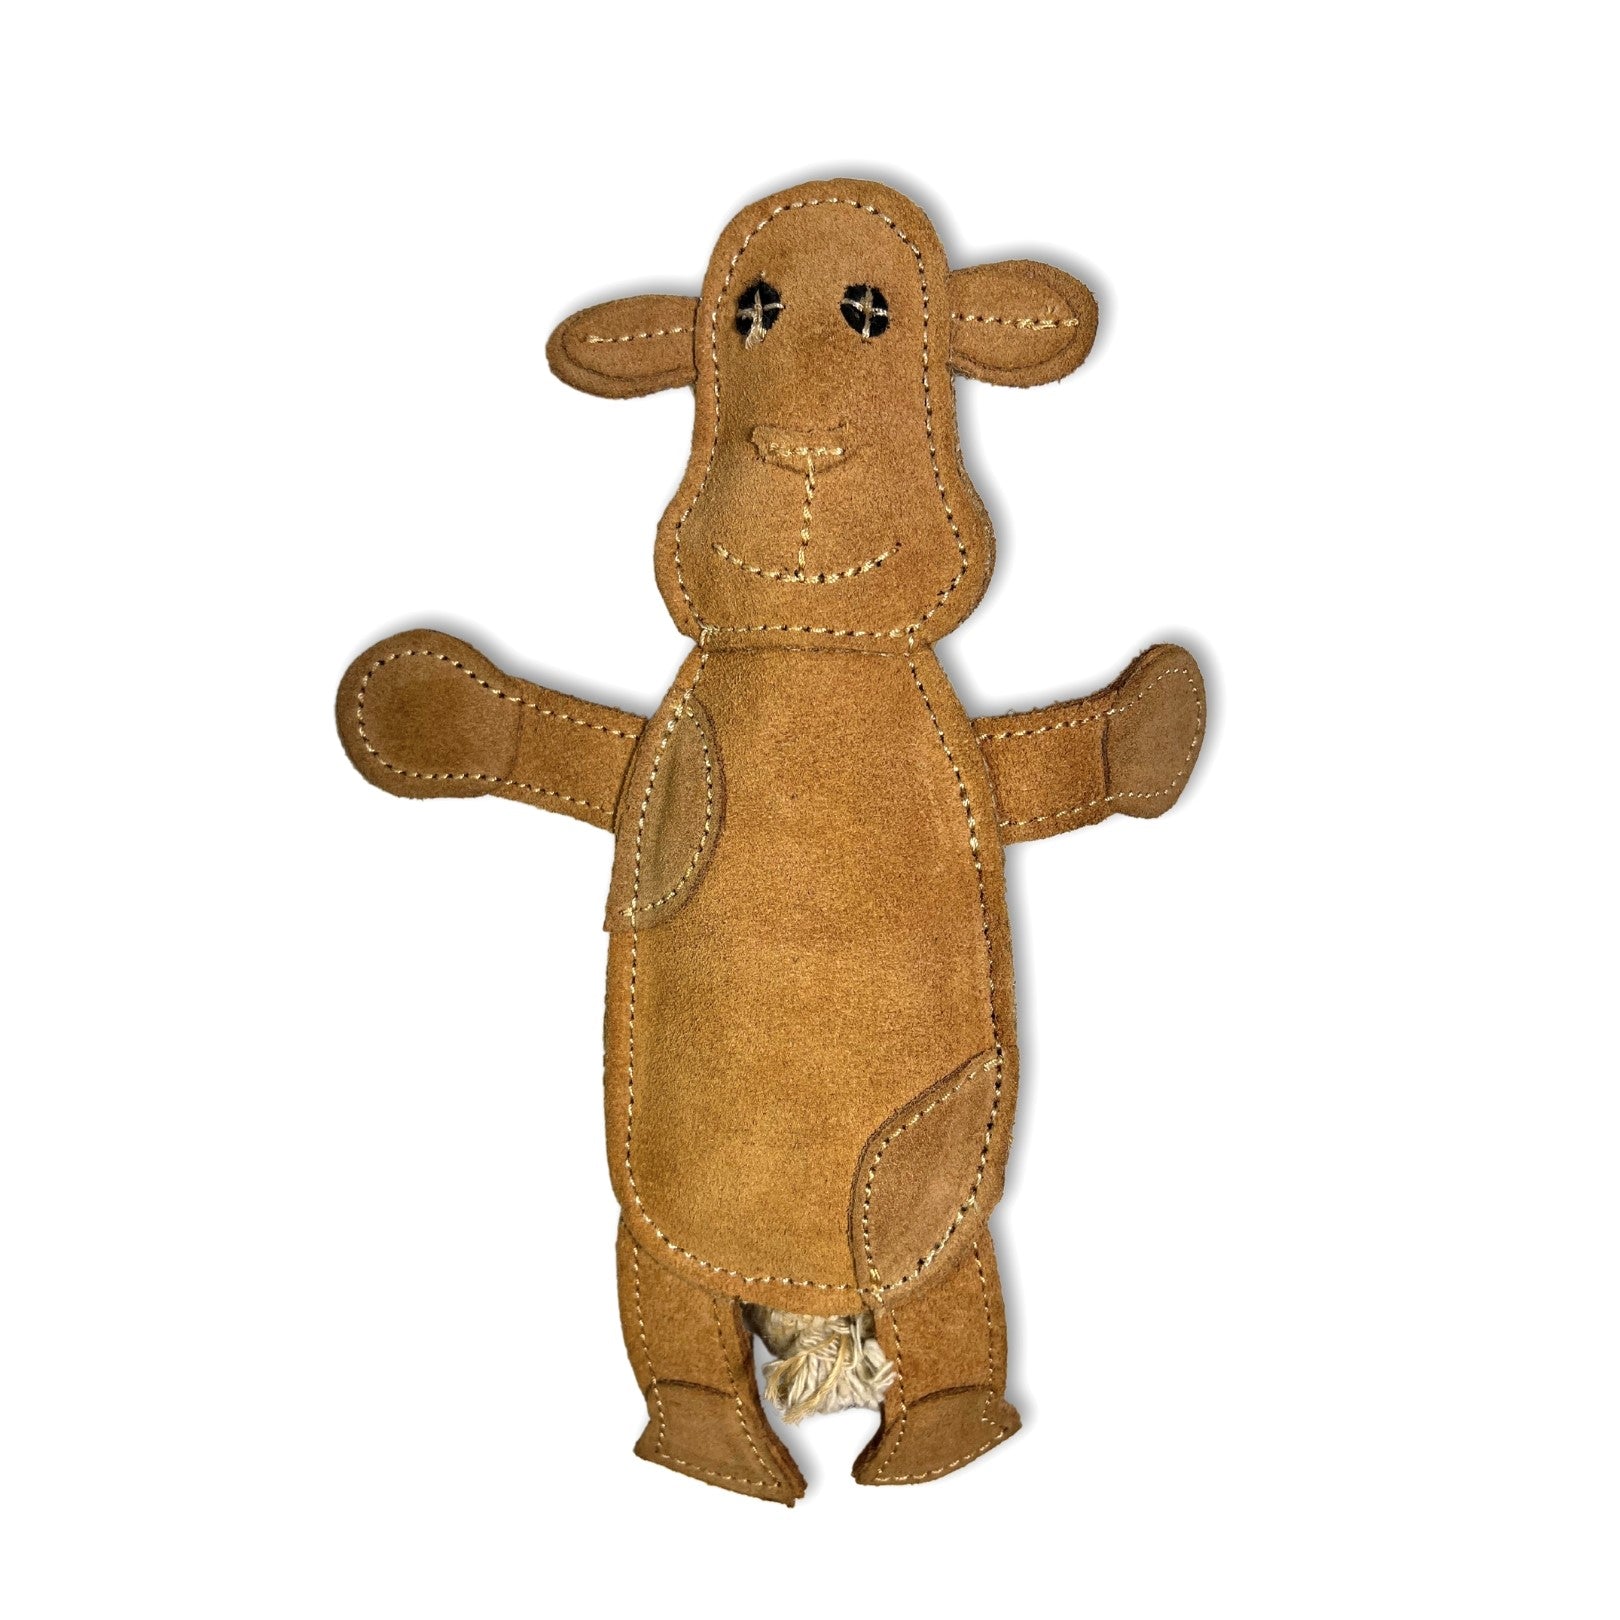 A plush toy cow named Cheryl with a friendly face, stitched details, and outstretched arms, isolated on a white background, inviting a playful hug or to be part of a child's imaginative playtime with Georgie Paws.